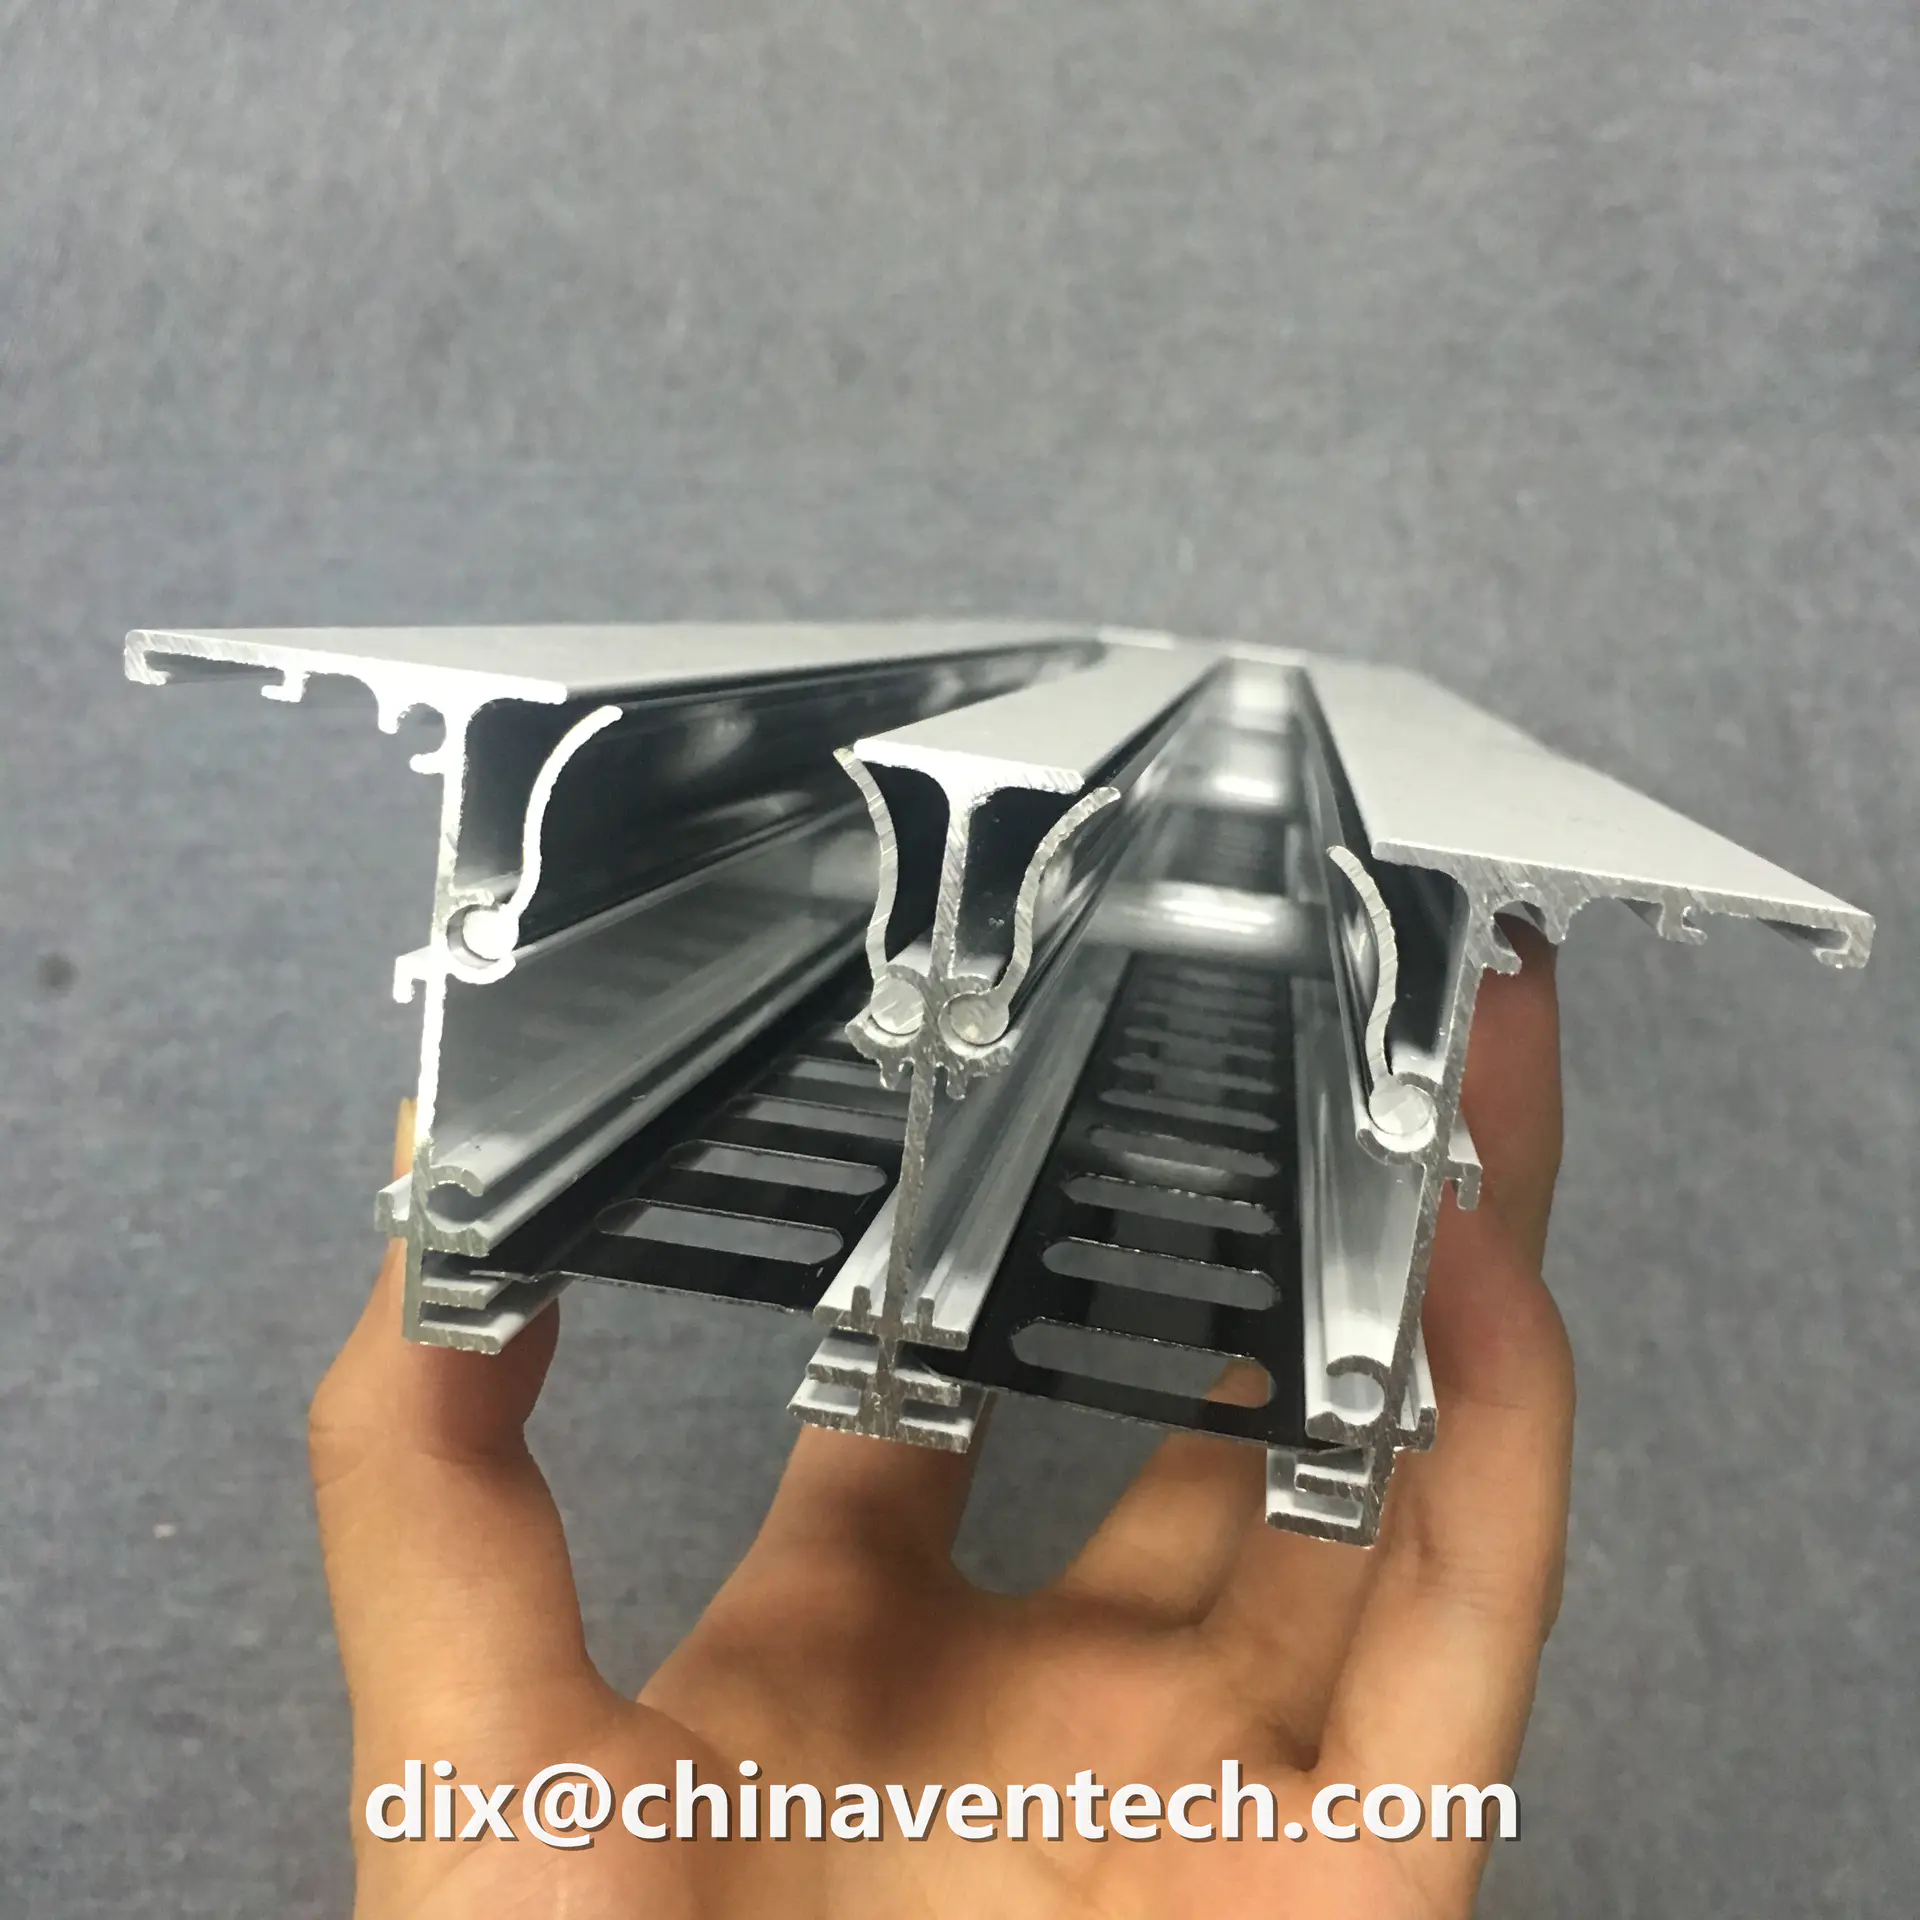 Hvac air terminals round duct extract air ceiling linear slot diffuser with plenum box